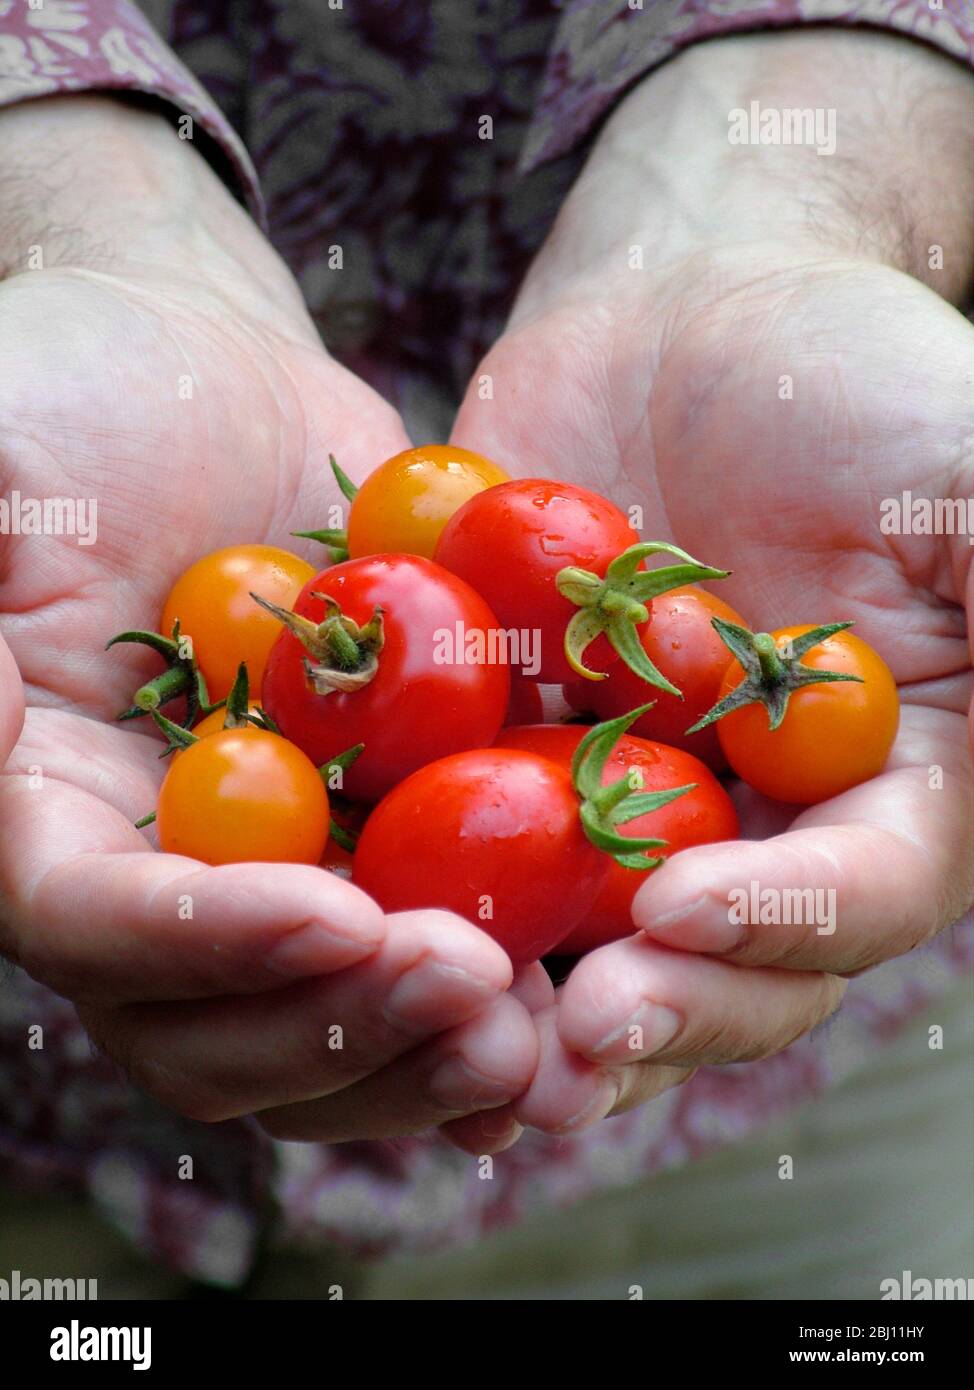 Home grown tomatoes, freshly picked held in man's hands - Stock Photo